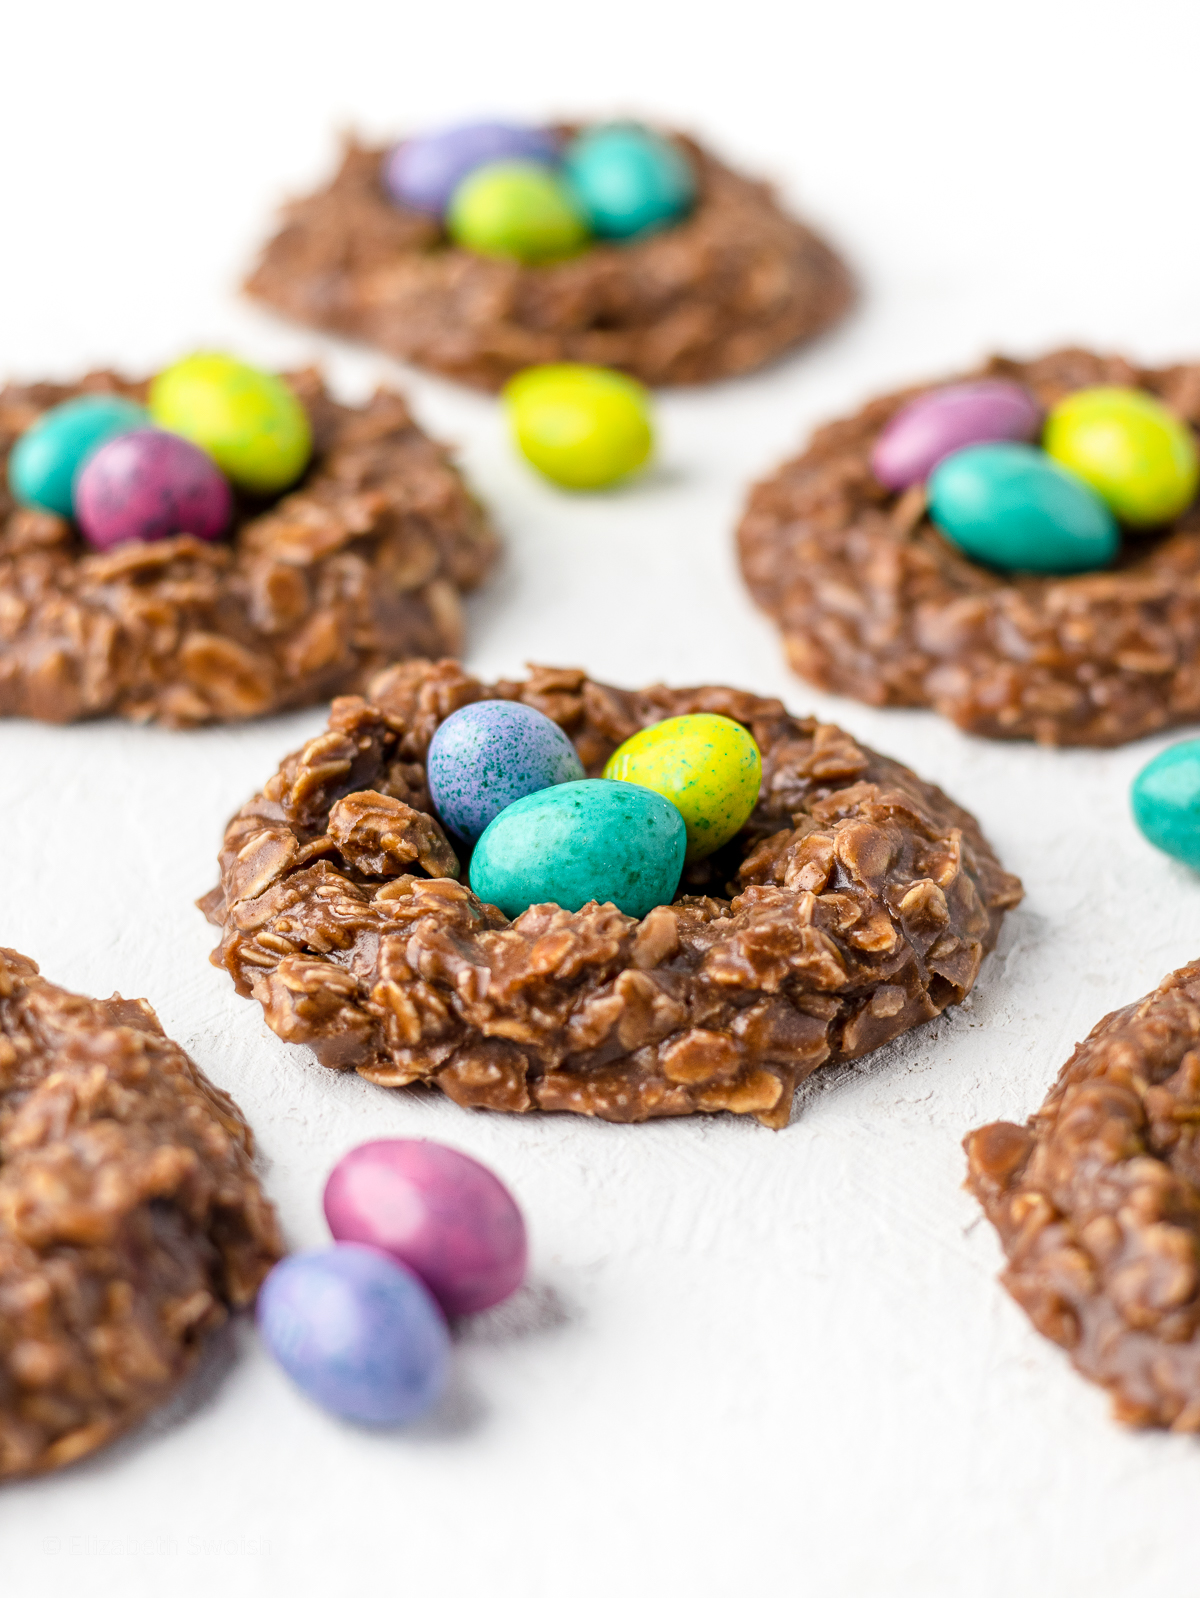 No bake cookies in the shape of birds nests with 3 candy eggs in the centers.